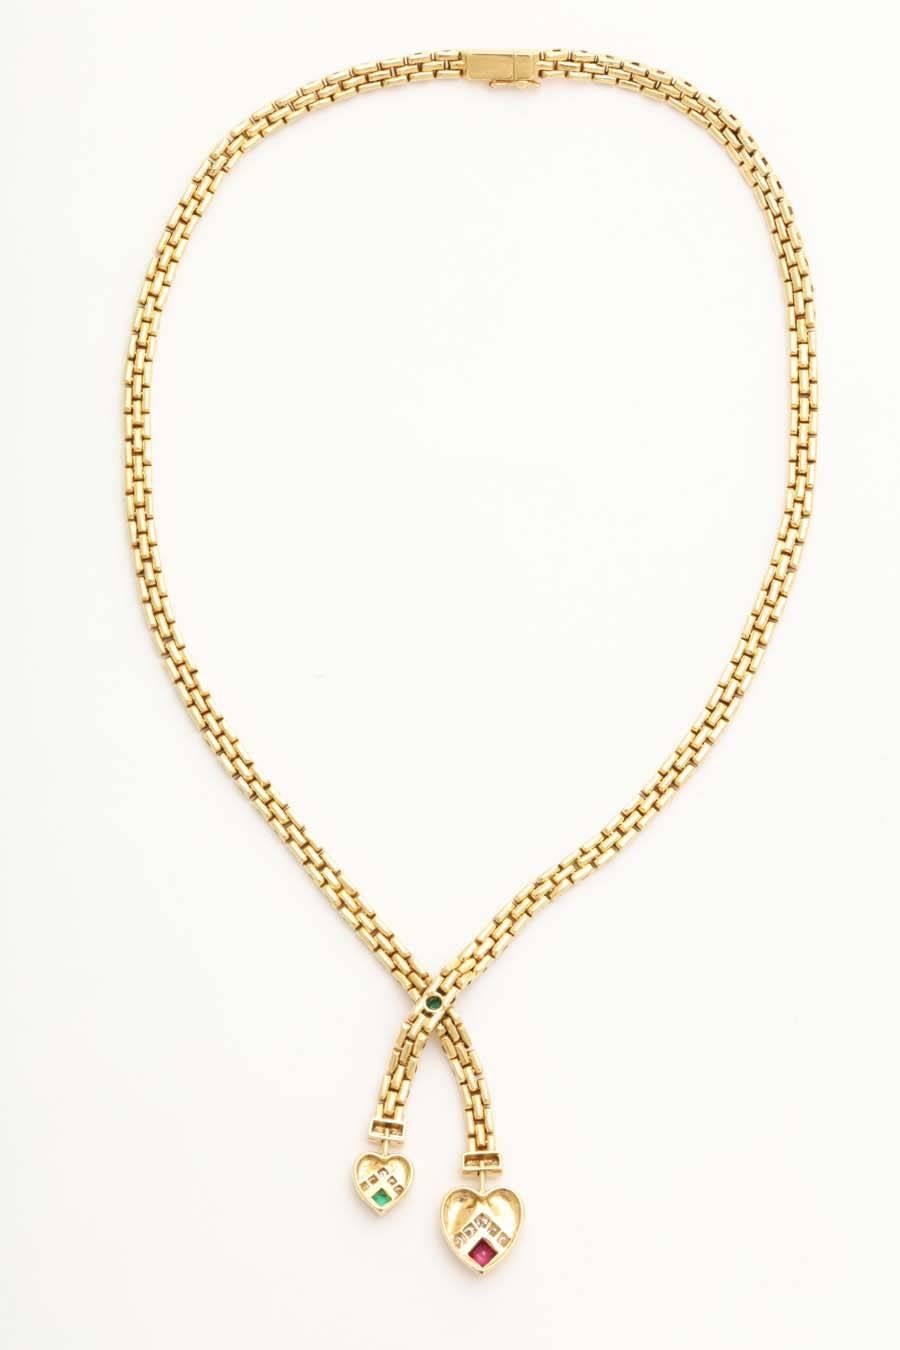 French Cartier Retro Style Gold and Gemstone Necklace